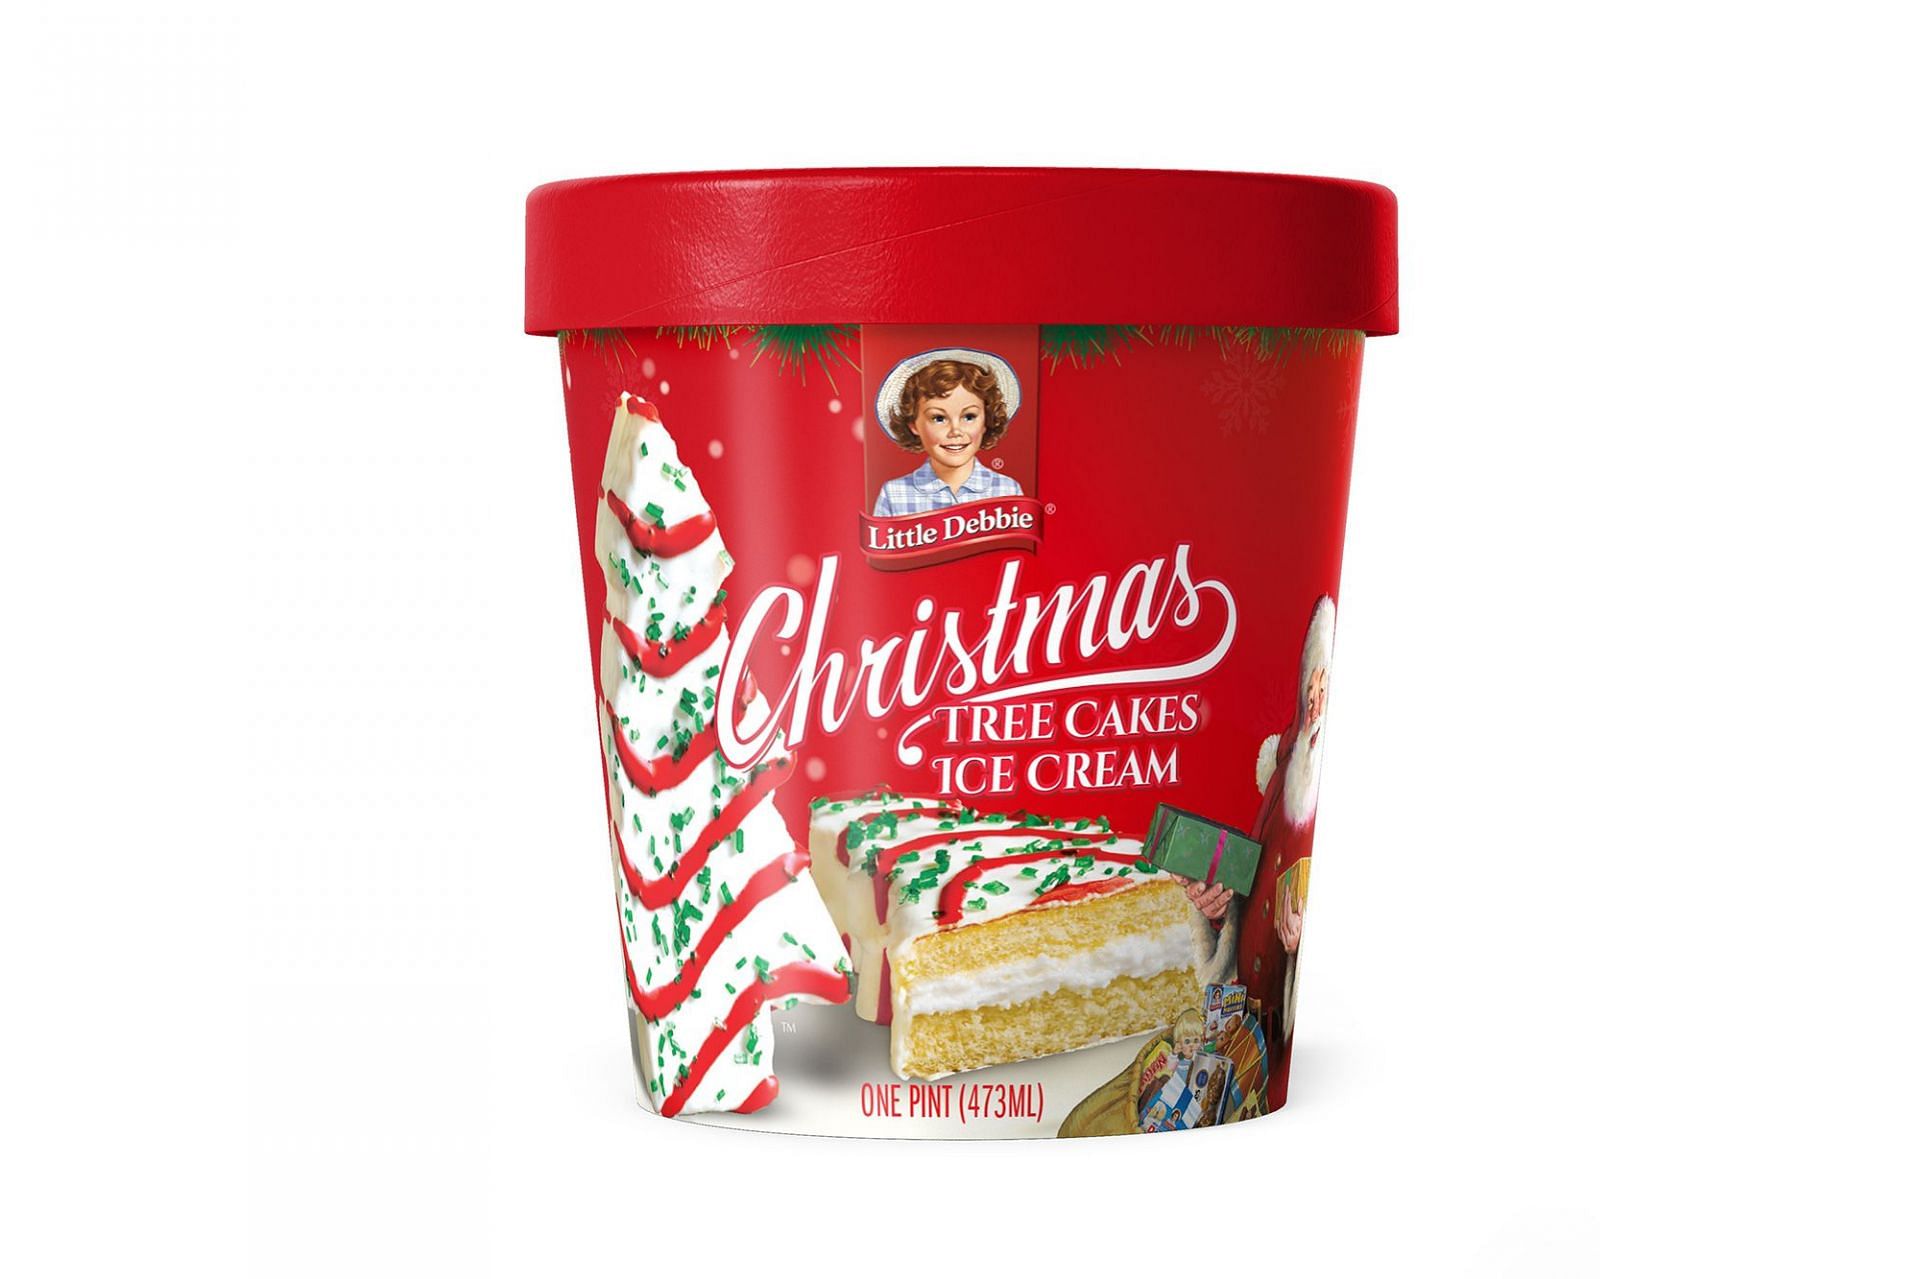 Their previous collaboration, the Christmas Tree Cakes Ice Cream (Image via LittleDebbie/Twitter)